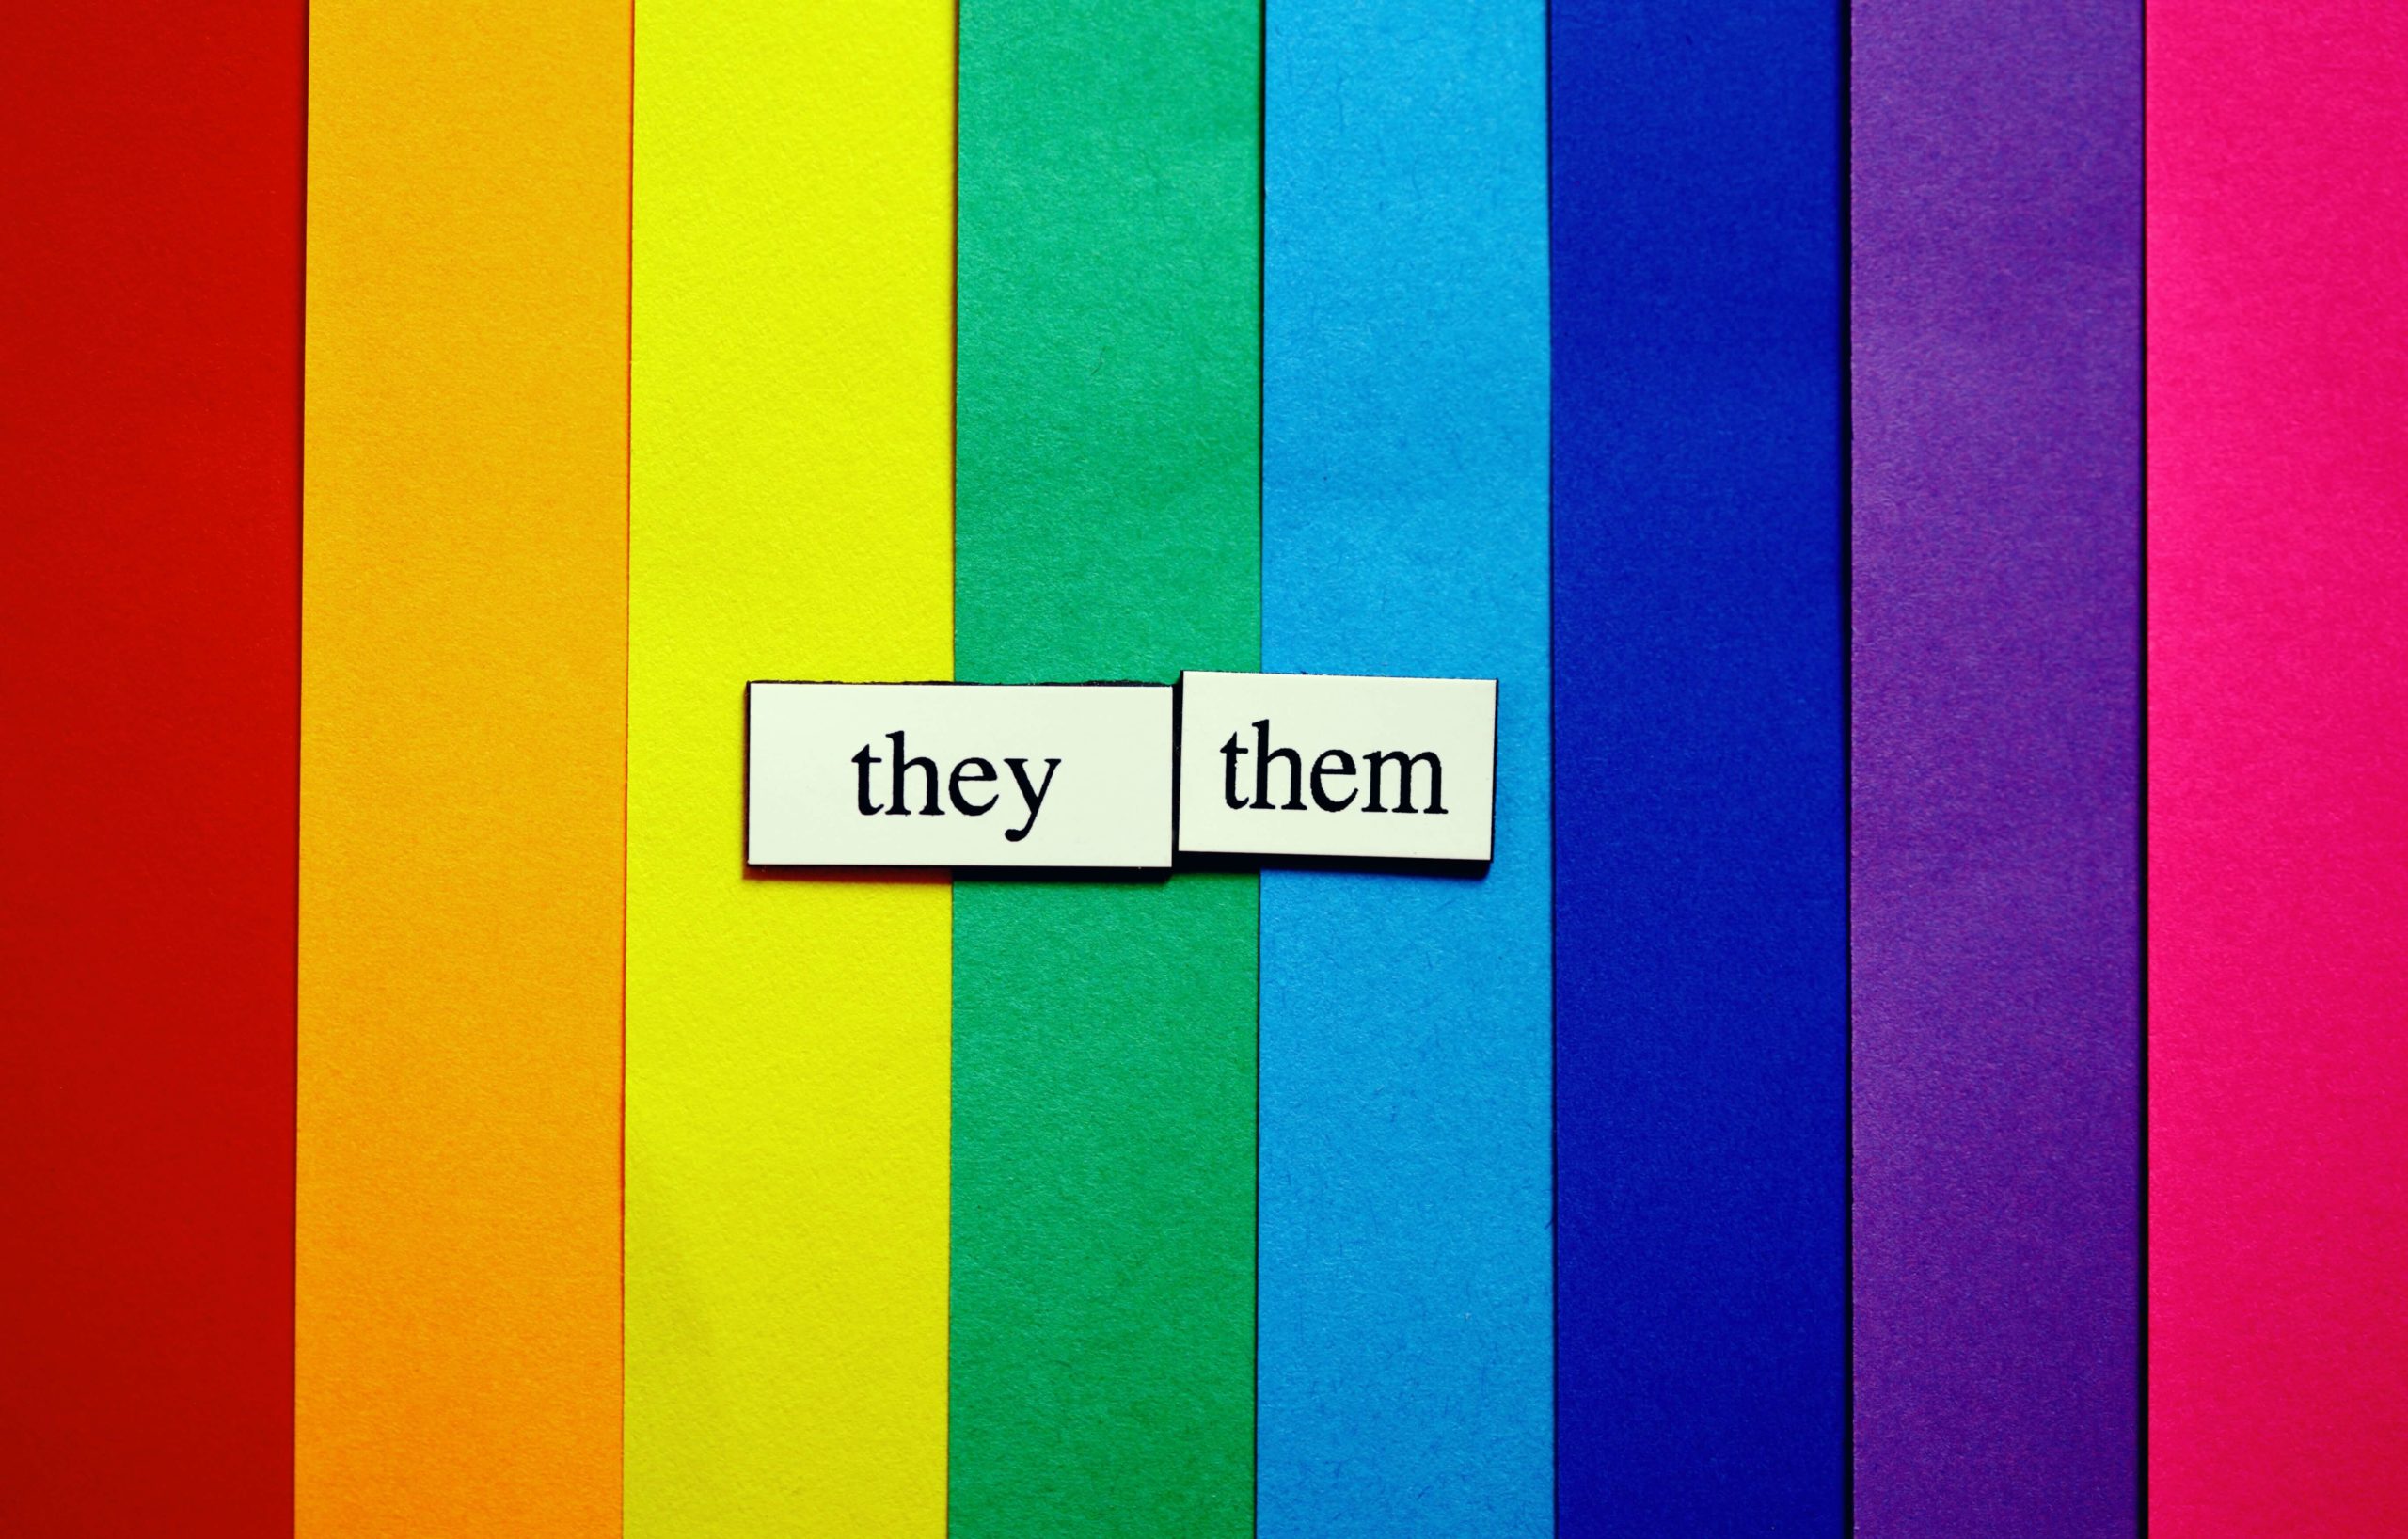 "they, them" magnets in front of a rainbow background